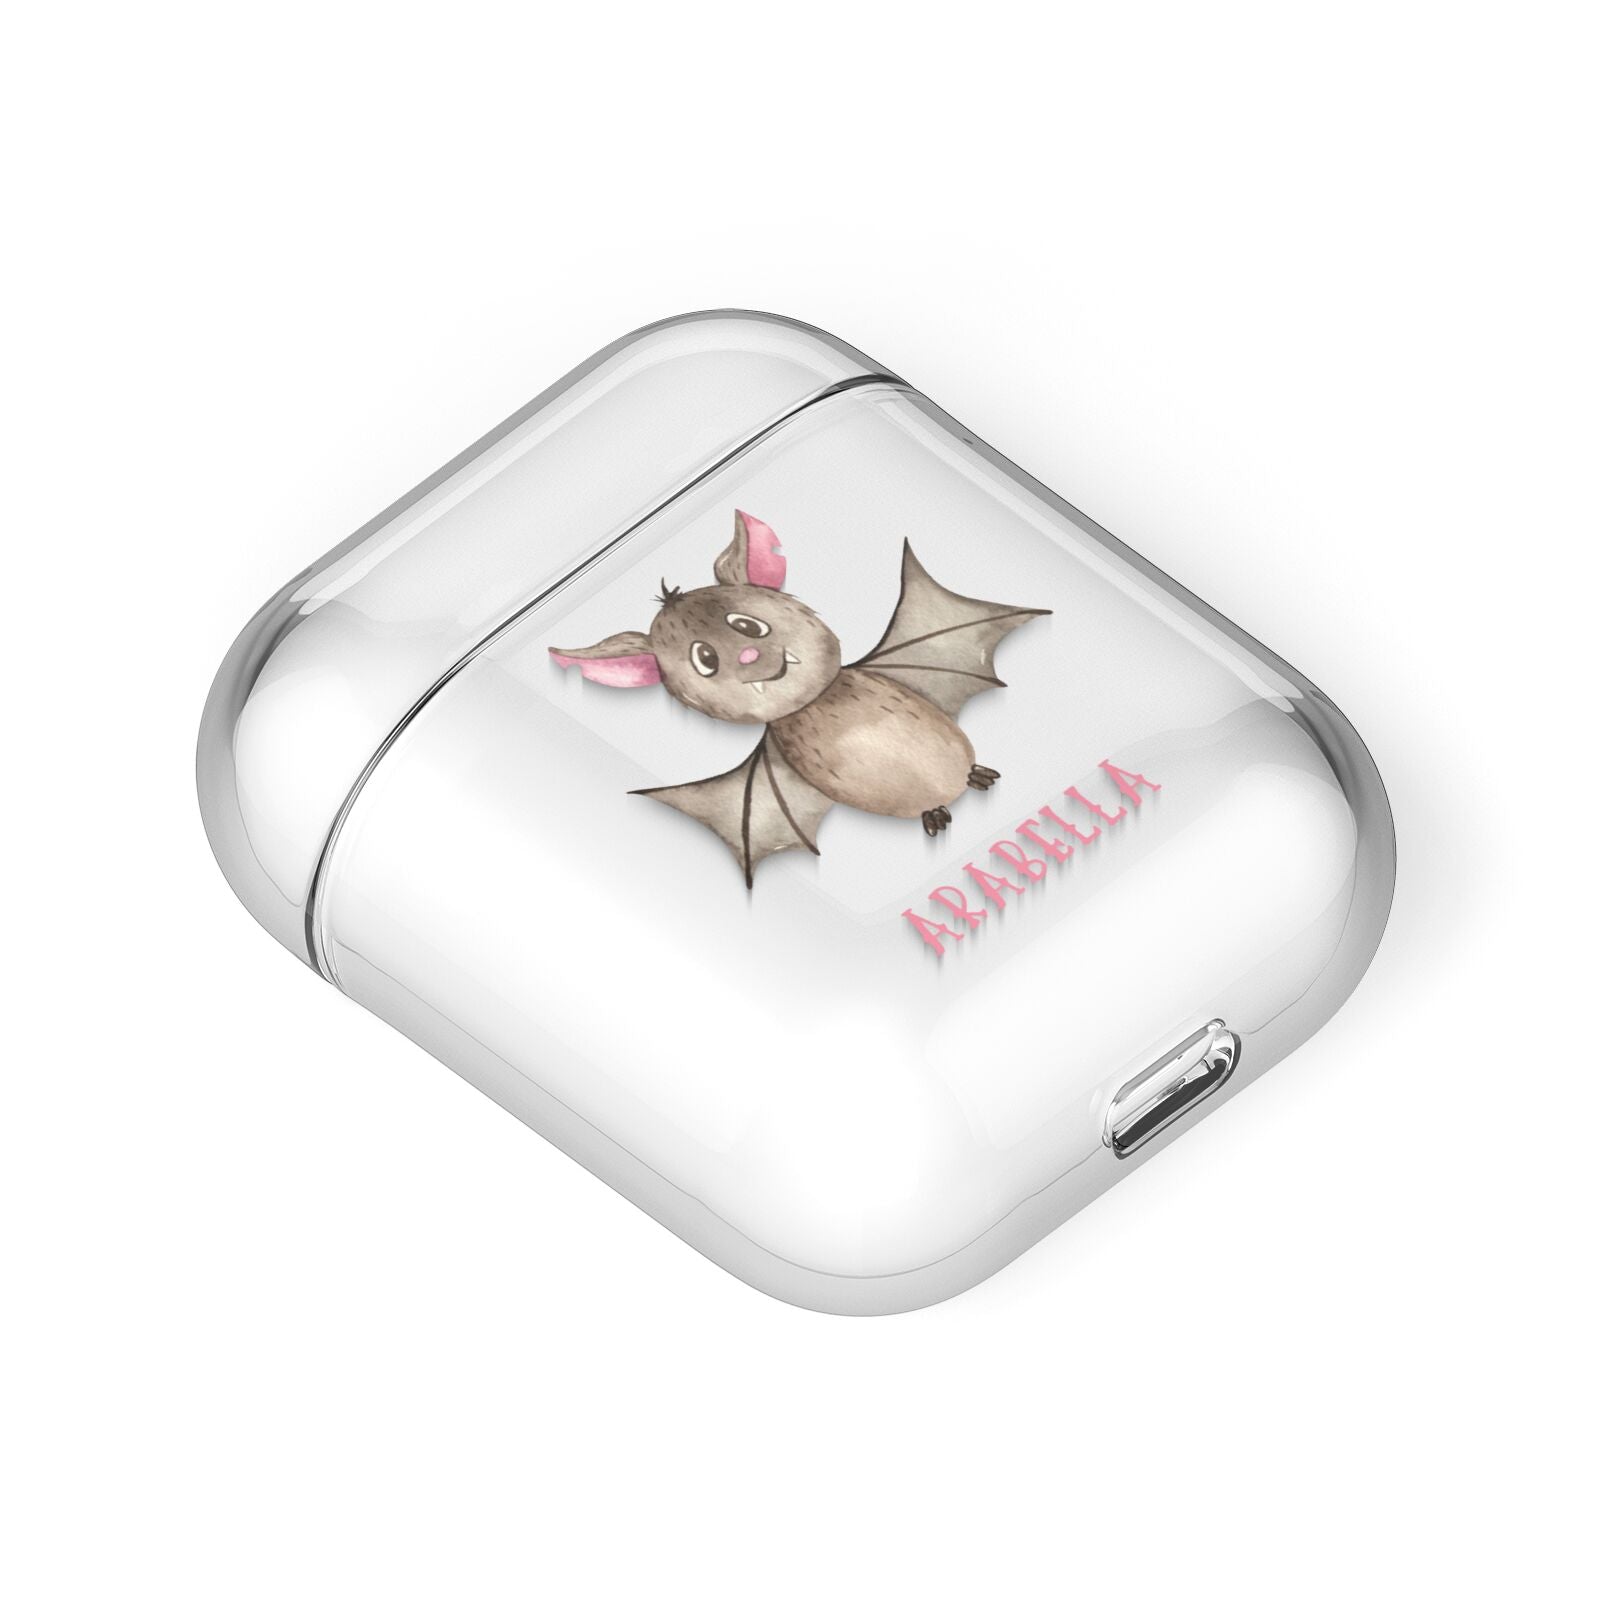 Bat Personalised AirPods Case Laid Flat